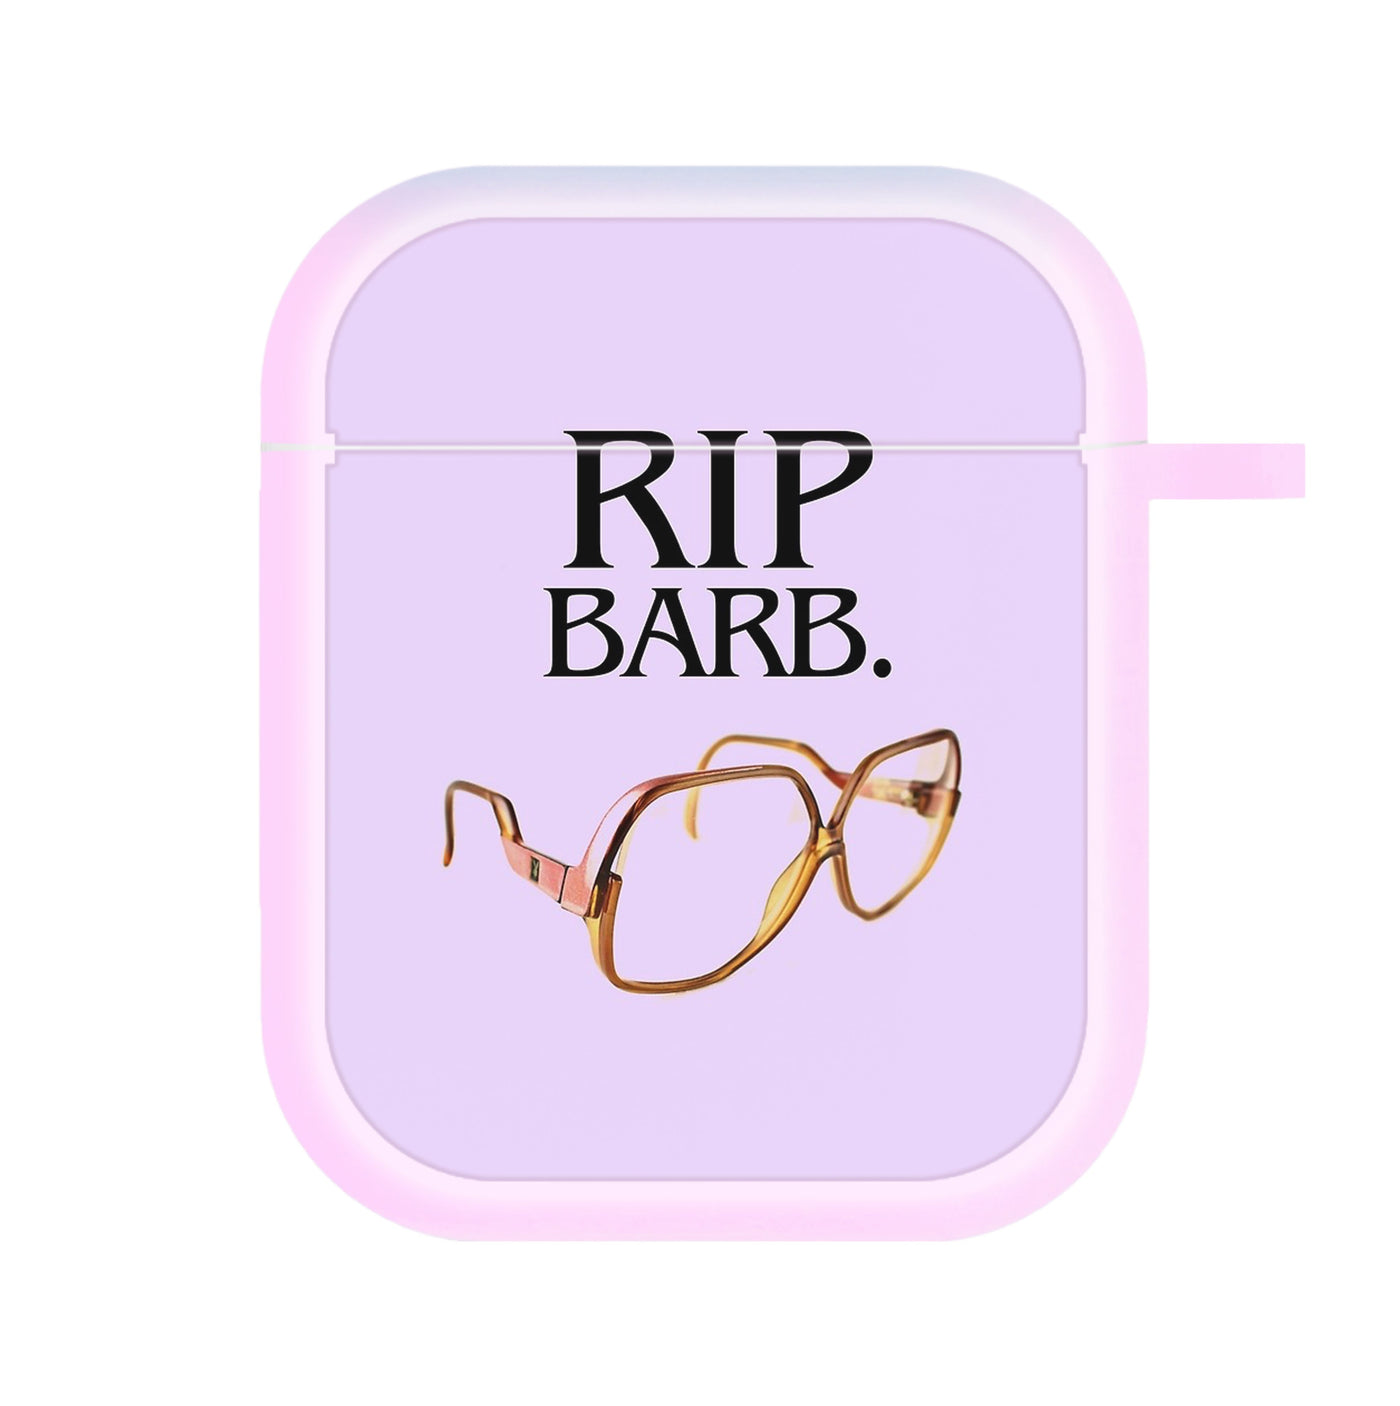 RIP Barb - Stranger Things AirPods Case